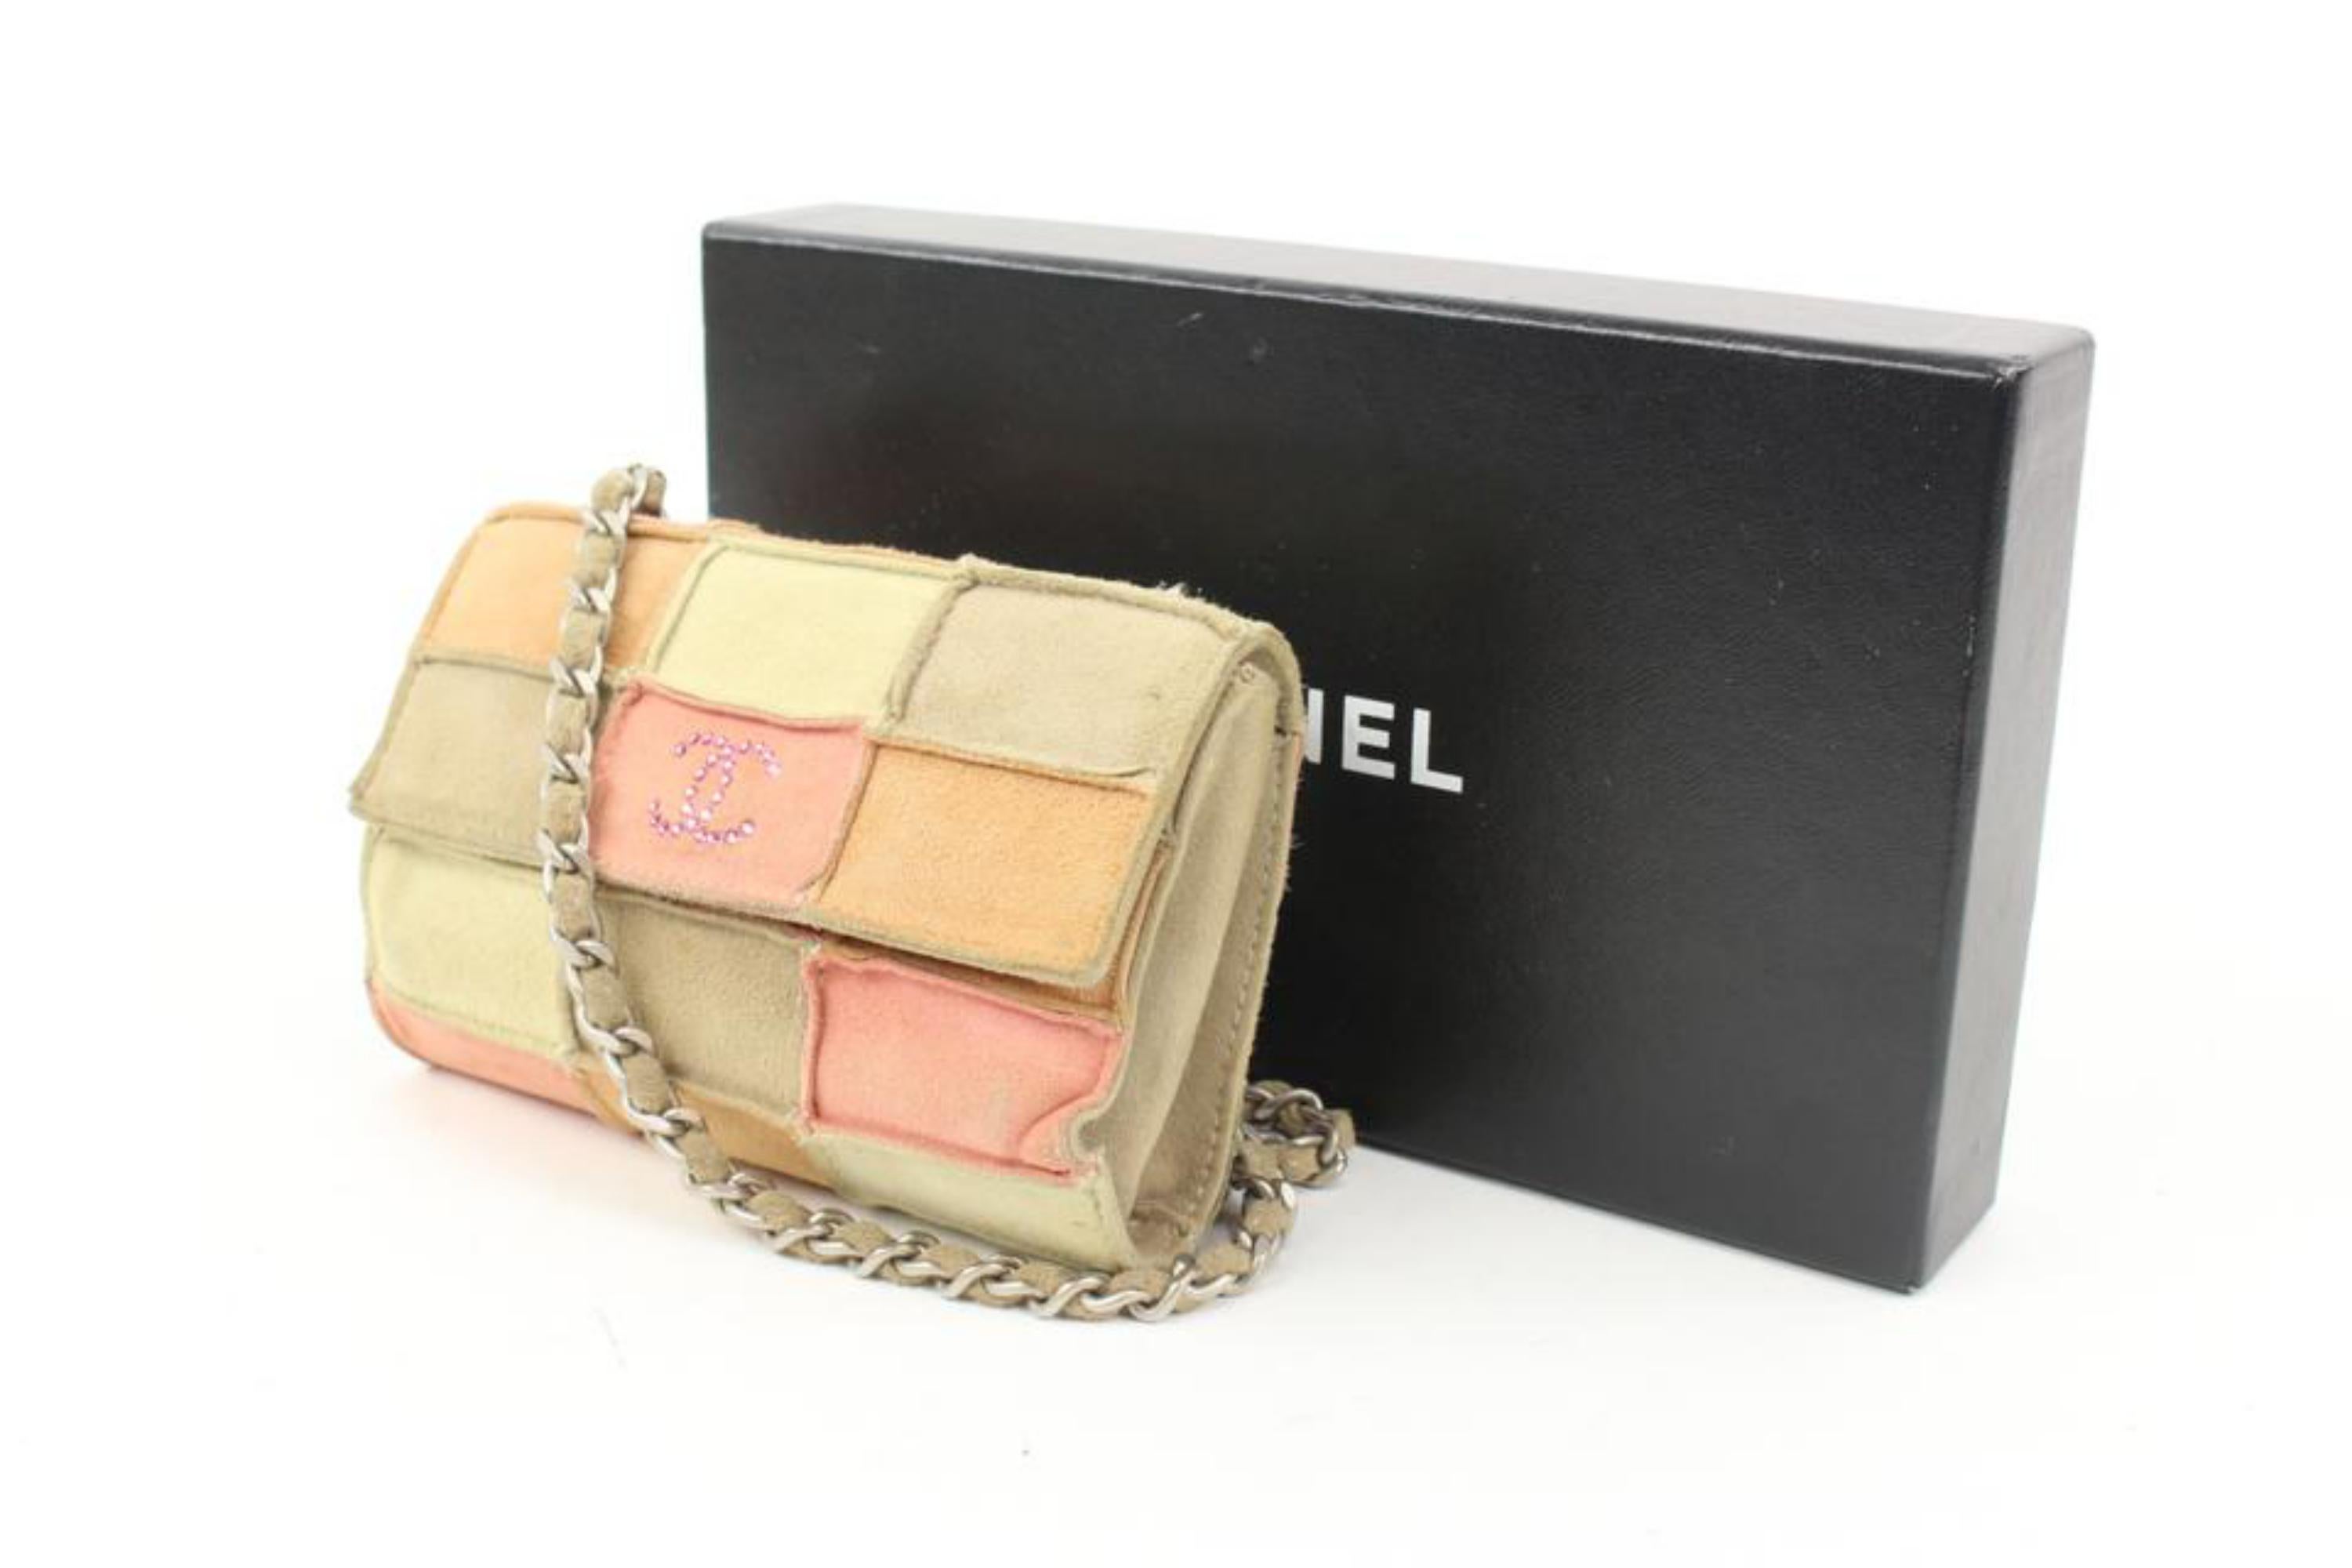 Chanel Multicolor Patchwork Suede CC Crystal Flap Bag s128c40
Date Code/Serial Number: 5958973
Made In: France
Measurements: Length:  5